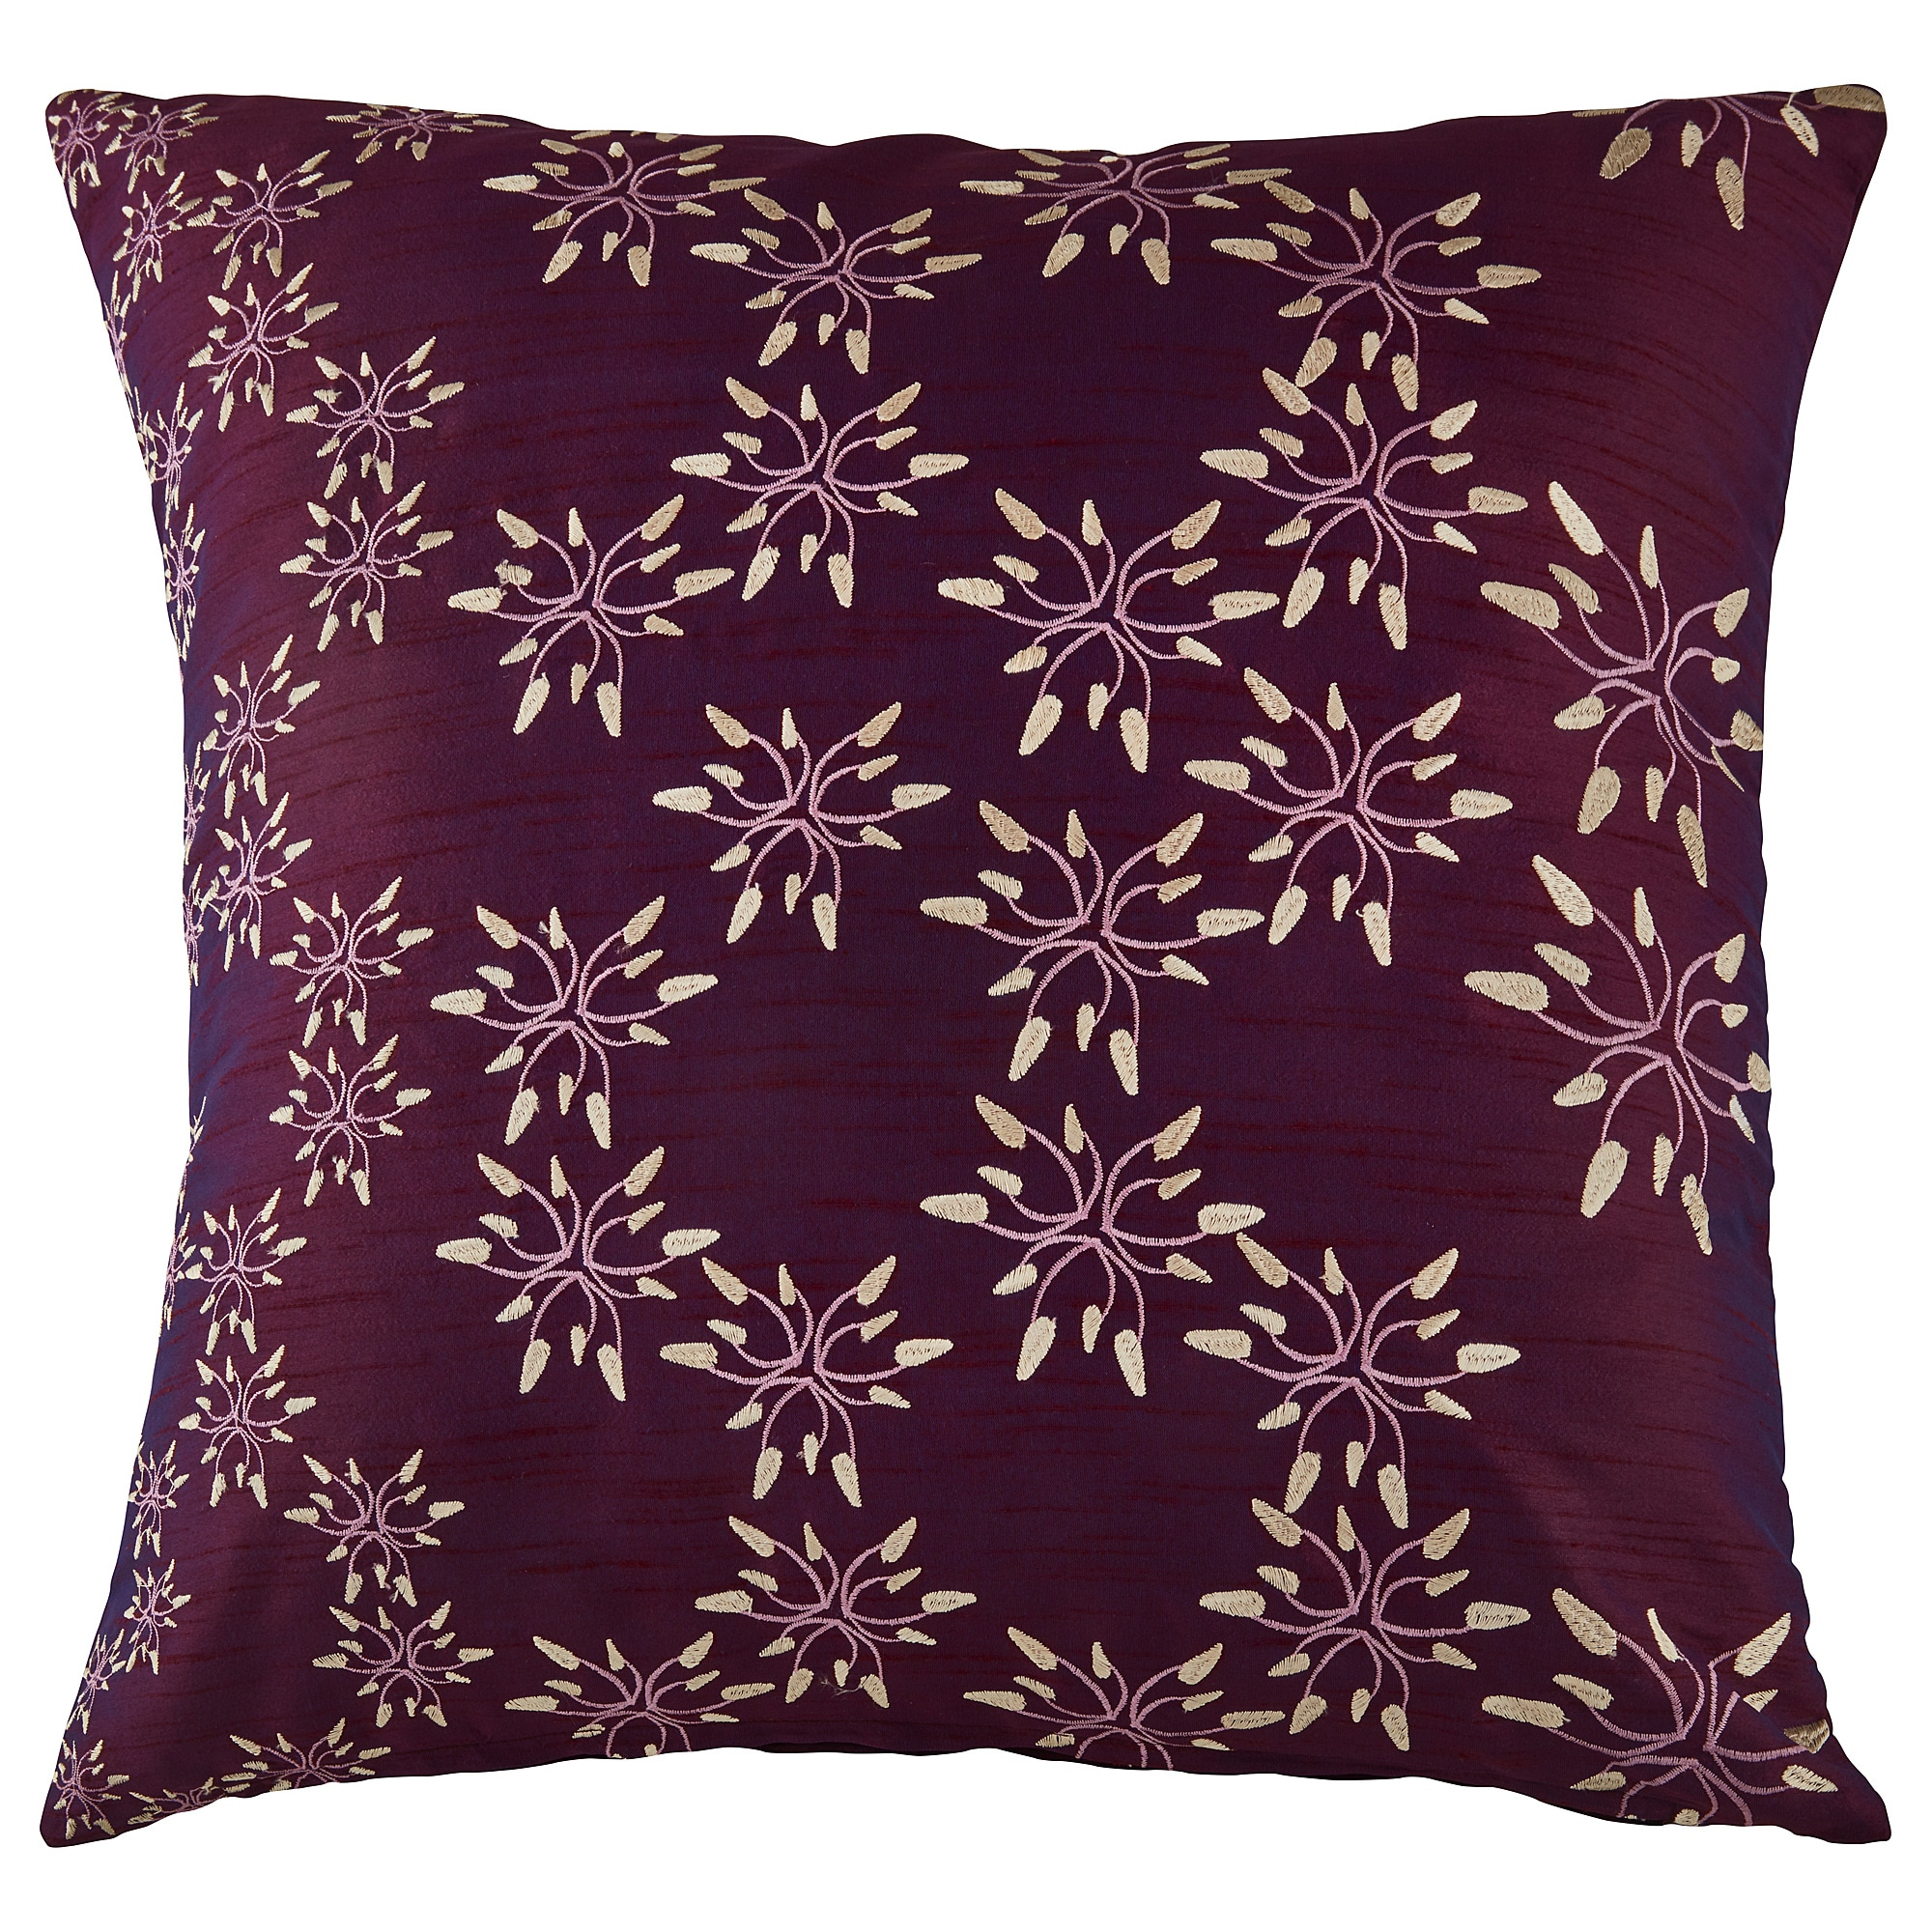 Cushion Cover Embroidery Patterns Krrslting Cushion Cover Lilac